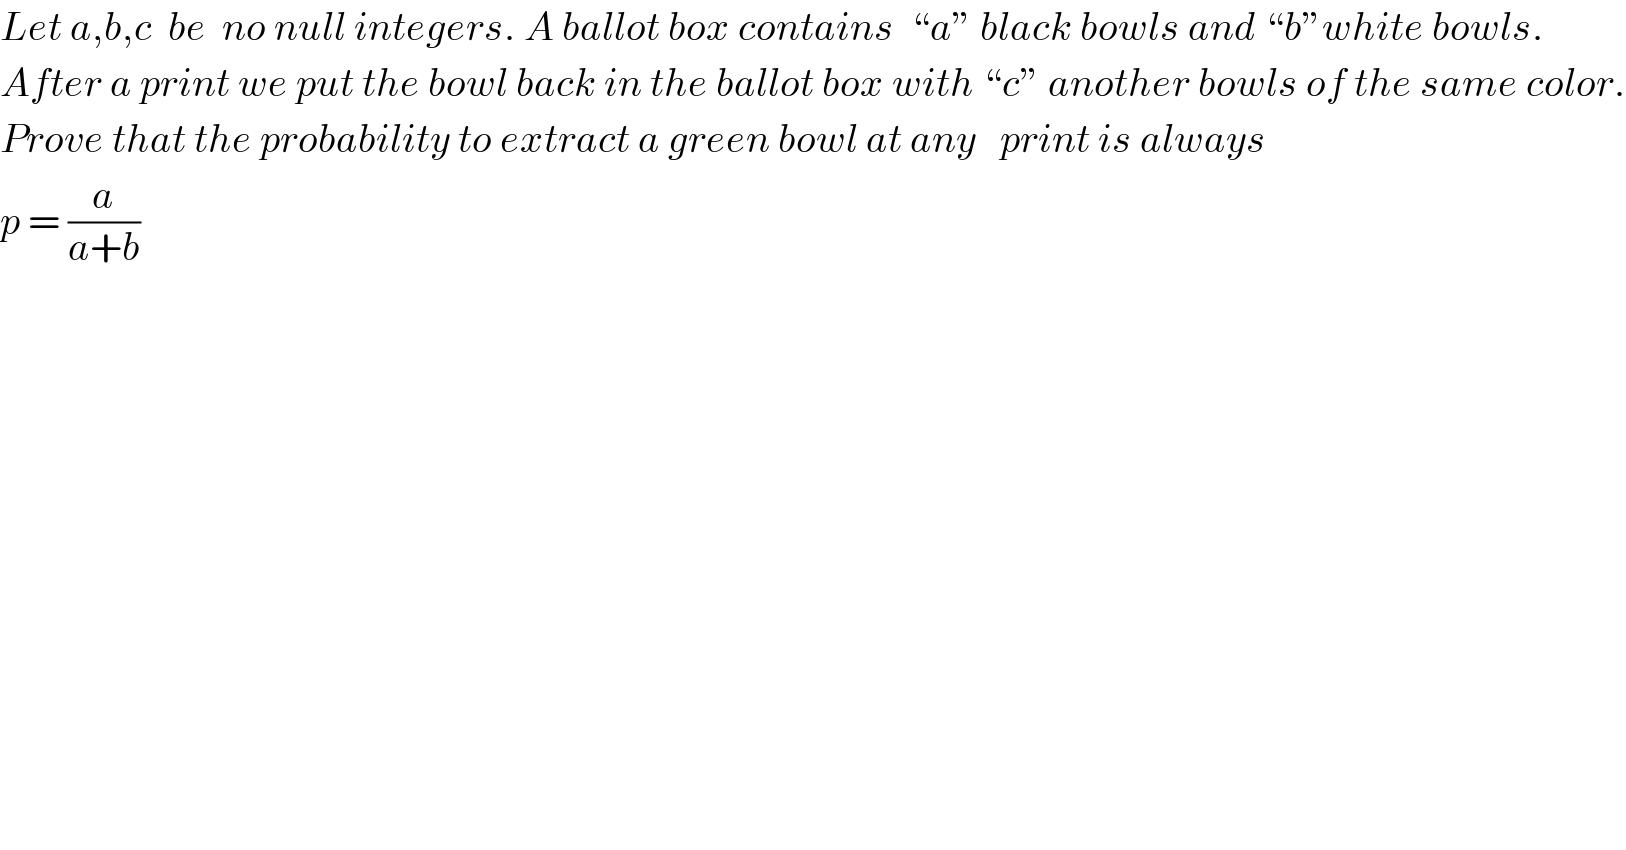 Let a,b,c  be  no null integers. A ballot box contains  “a” black bowls and “b”white bowls.  After a print we put the bowl back in the ballot box with “c” another bowls of the same color.  Prove that the probability to extract a green bowl at any   print is always  p = (a/(a+b))  